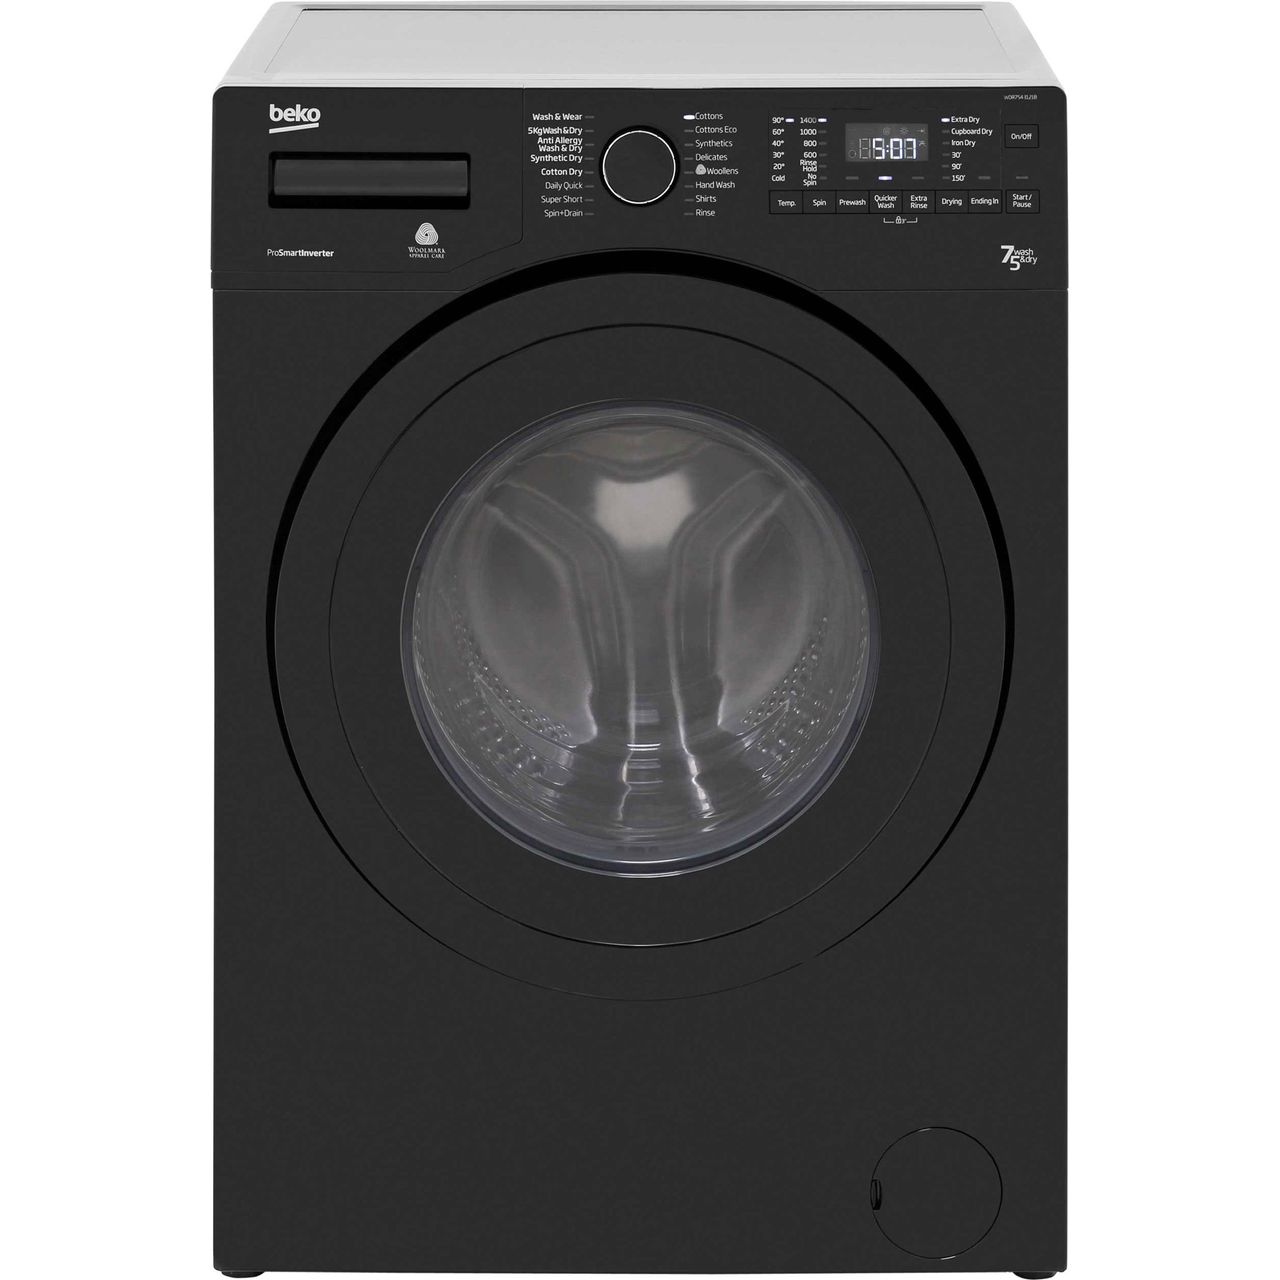 Beko WDR7543121B 7Kg / 5Kg Washer Dryer with 1400 rpm Review